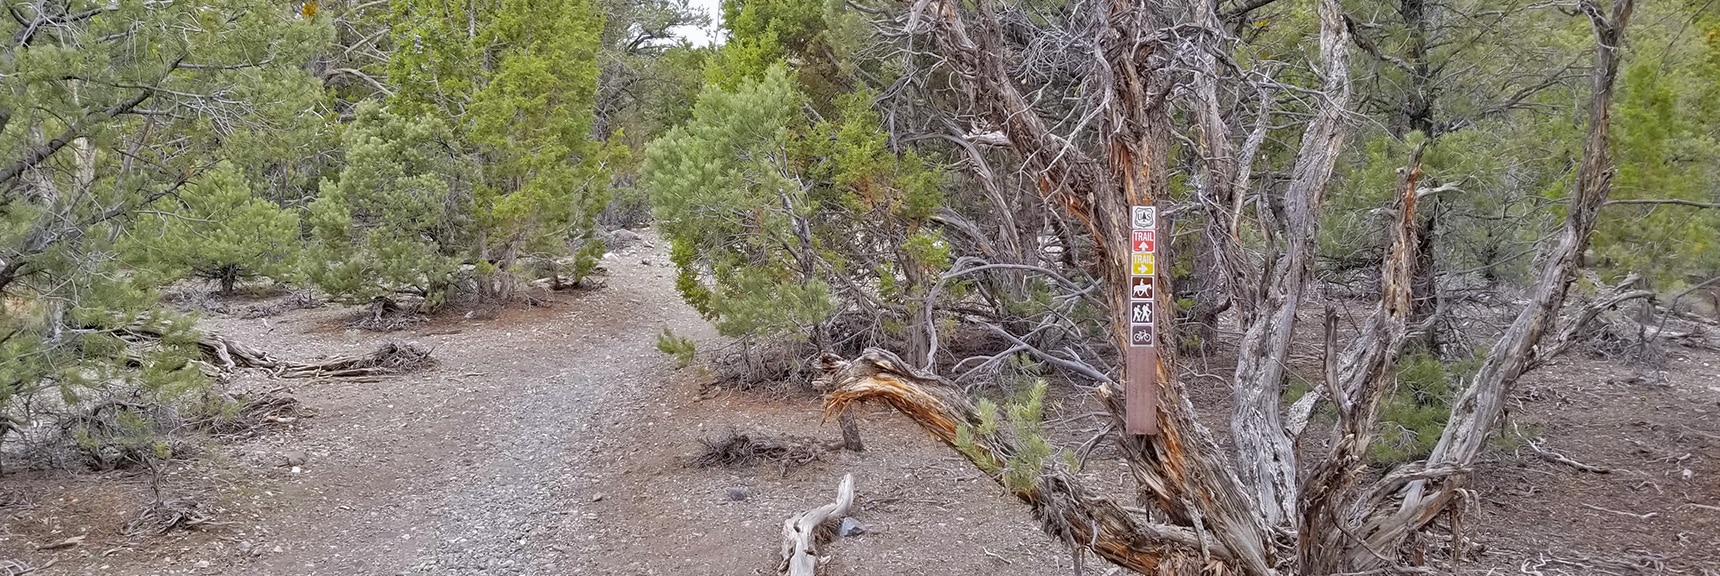 Mud Springs and Sawmill Trails Divide Marker | Sawmill Trail to McFarland Peak | Spring Mountains, Nevada